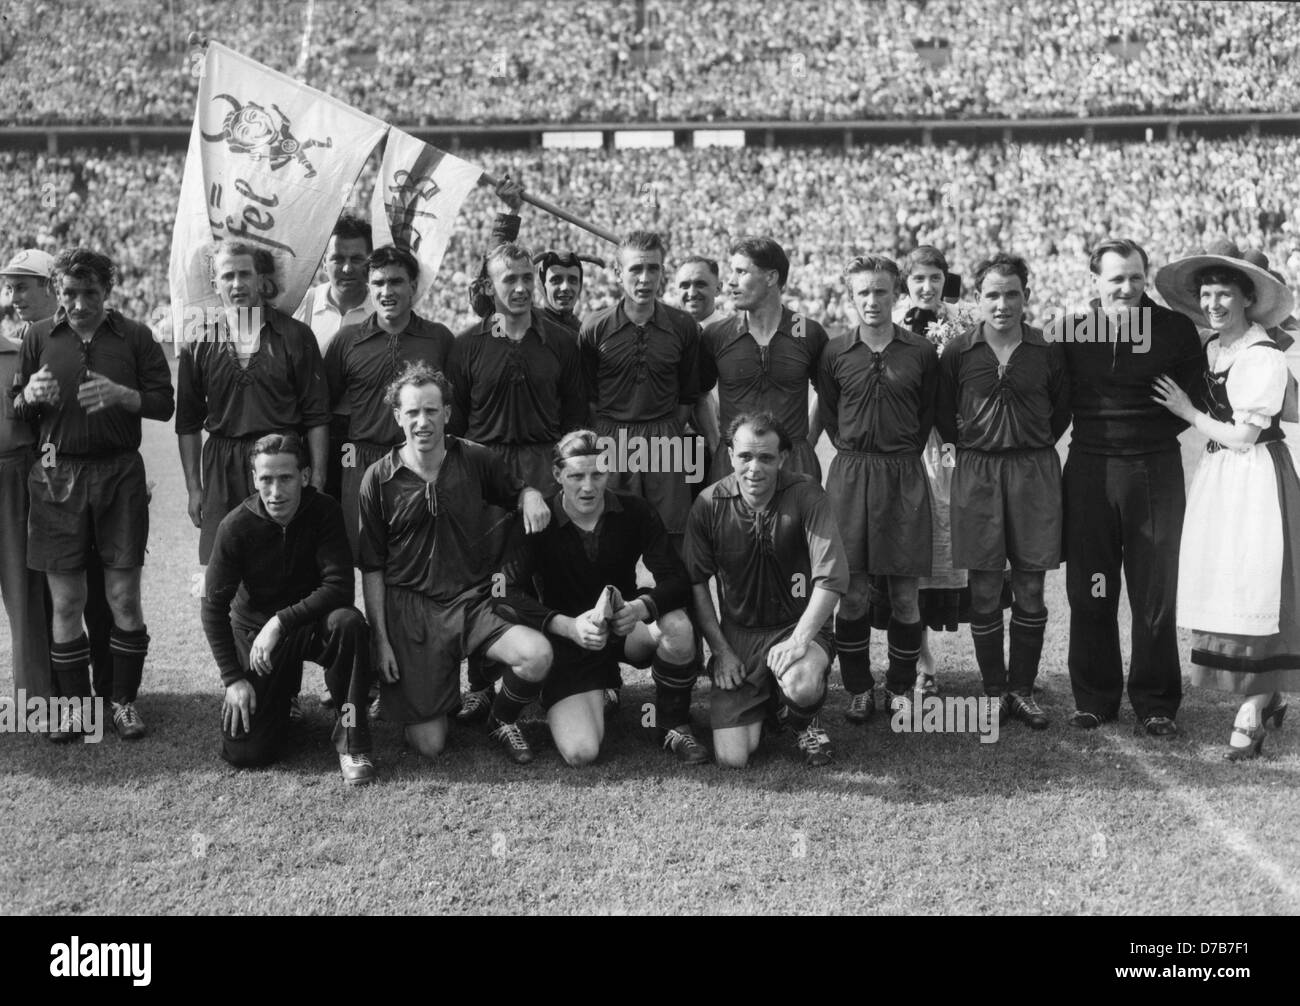 The team of 1. FC Kaiserslautern wins the German Championship on the 21st  of June in 1953 against VfB Stuttgart with 4:1. National players Fritz  Walter und Werner Liebrich (standing, from left),